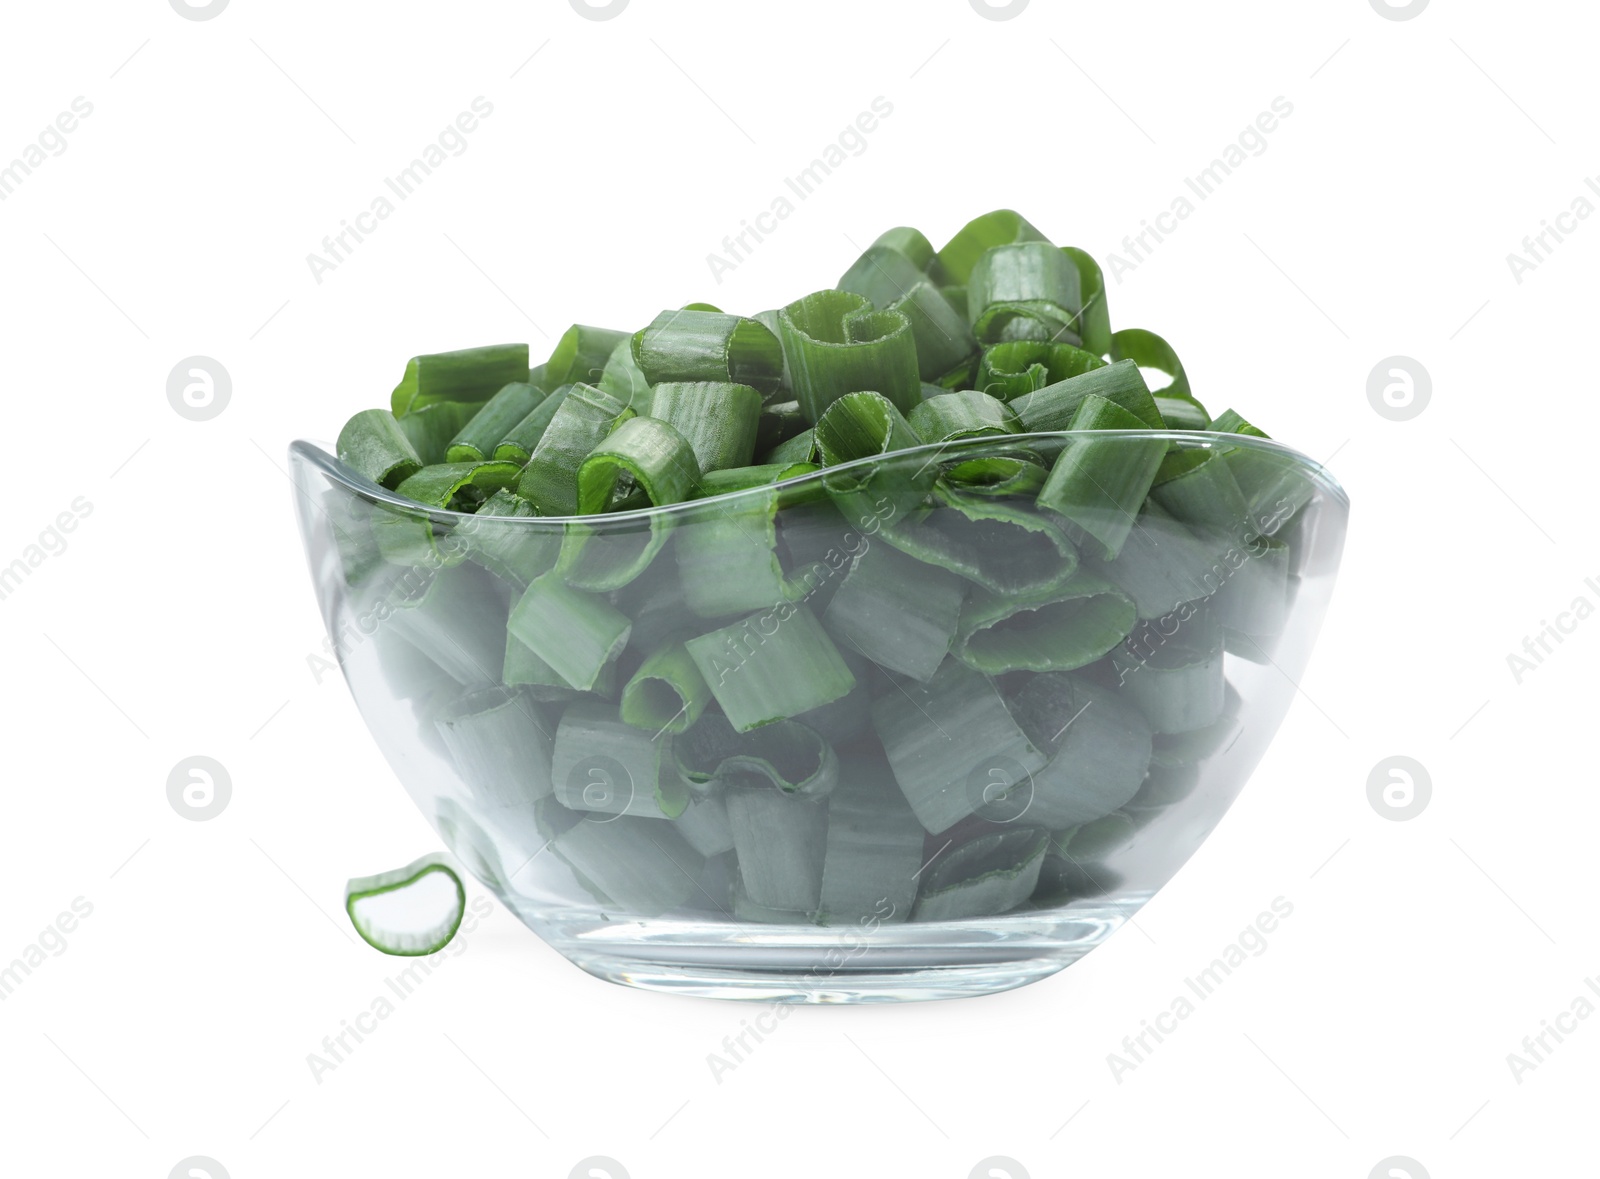 Photo of Chopped fresh green onion in bowl isolated on white